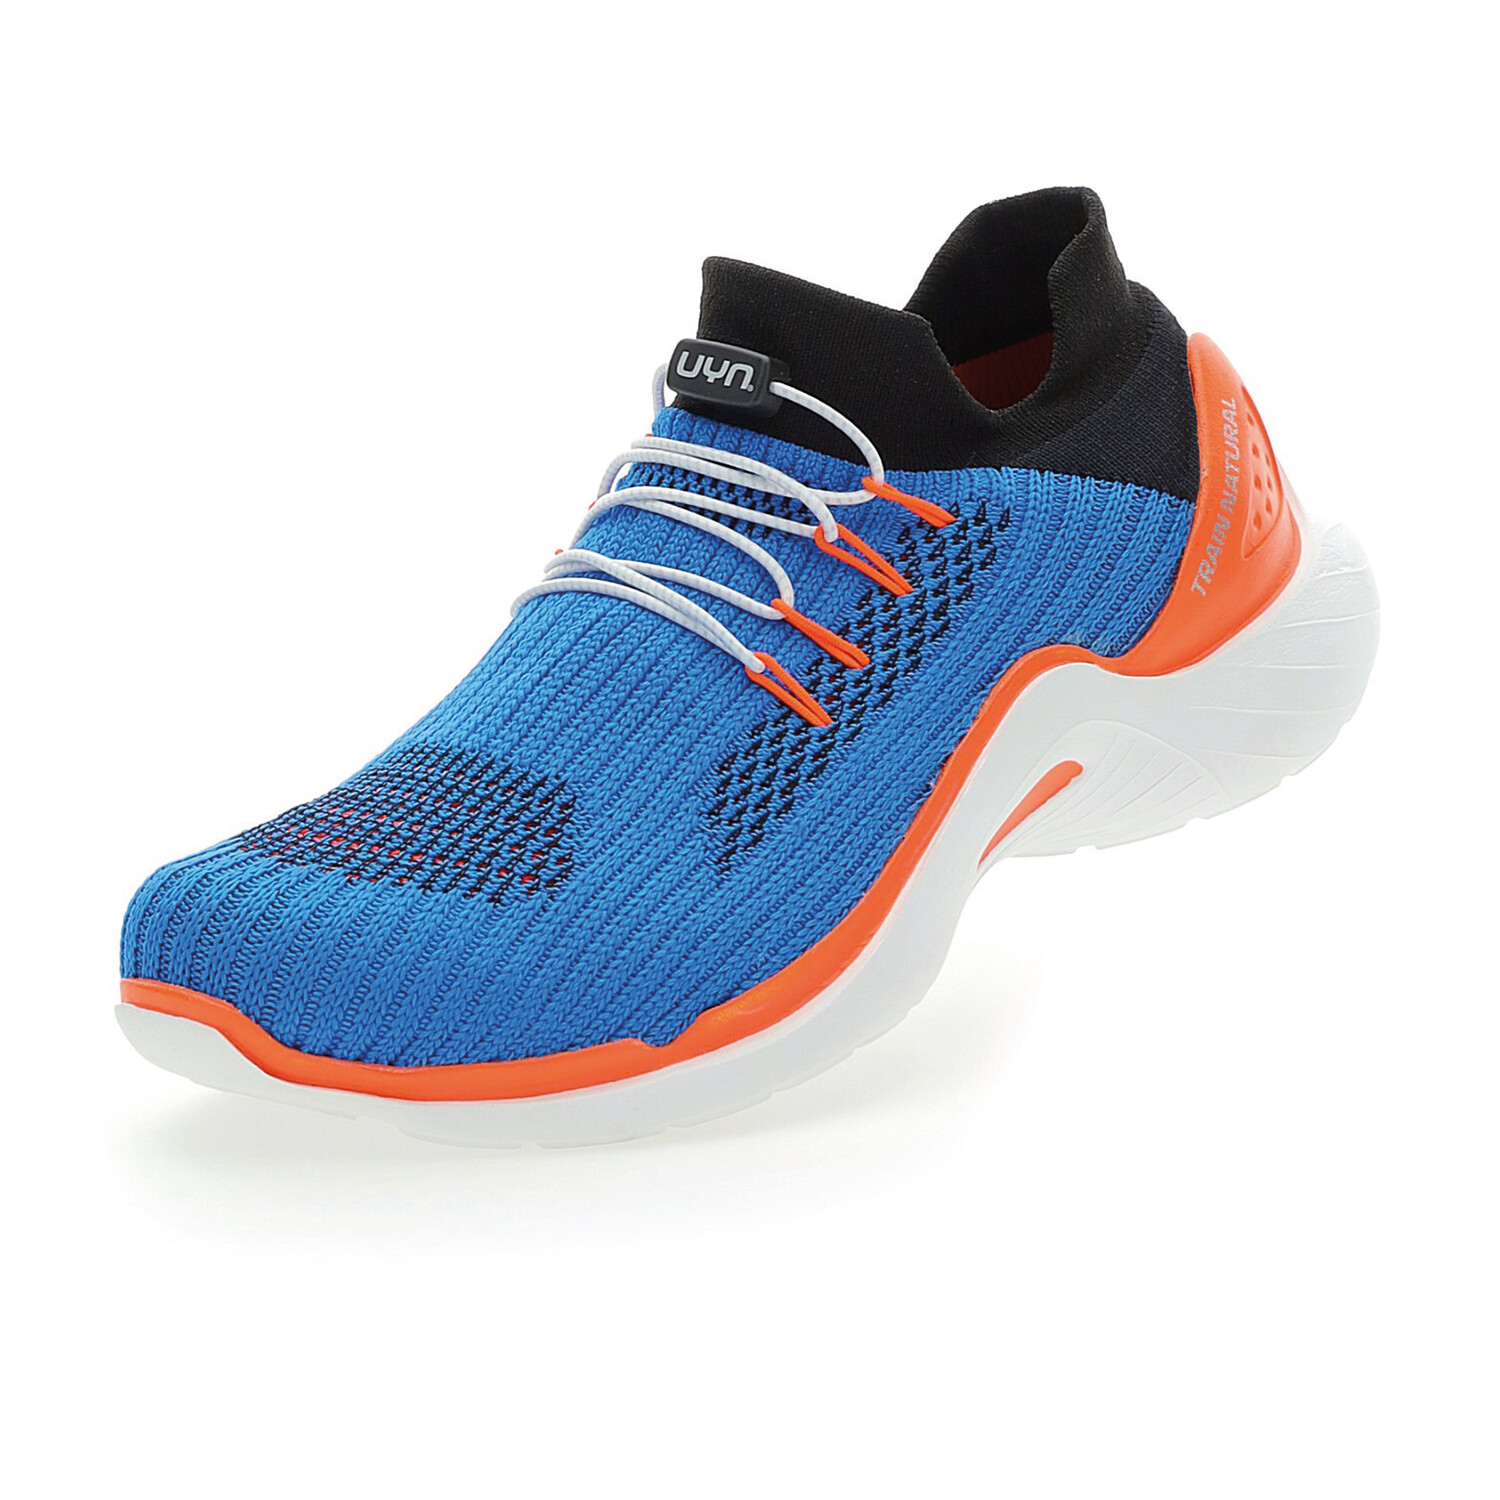 kim Forfatning Agnes Gray Uyn Man City Running Shoes // Blue + Orange (EURO Men's Size 43) - UYN -  Unleash Your Nature - Touch of Modern